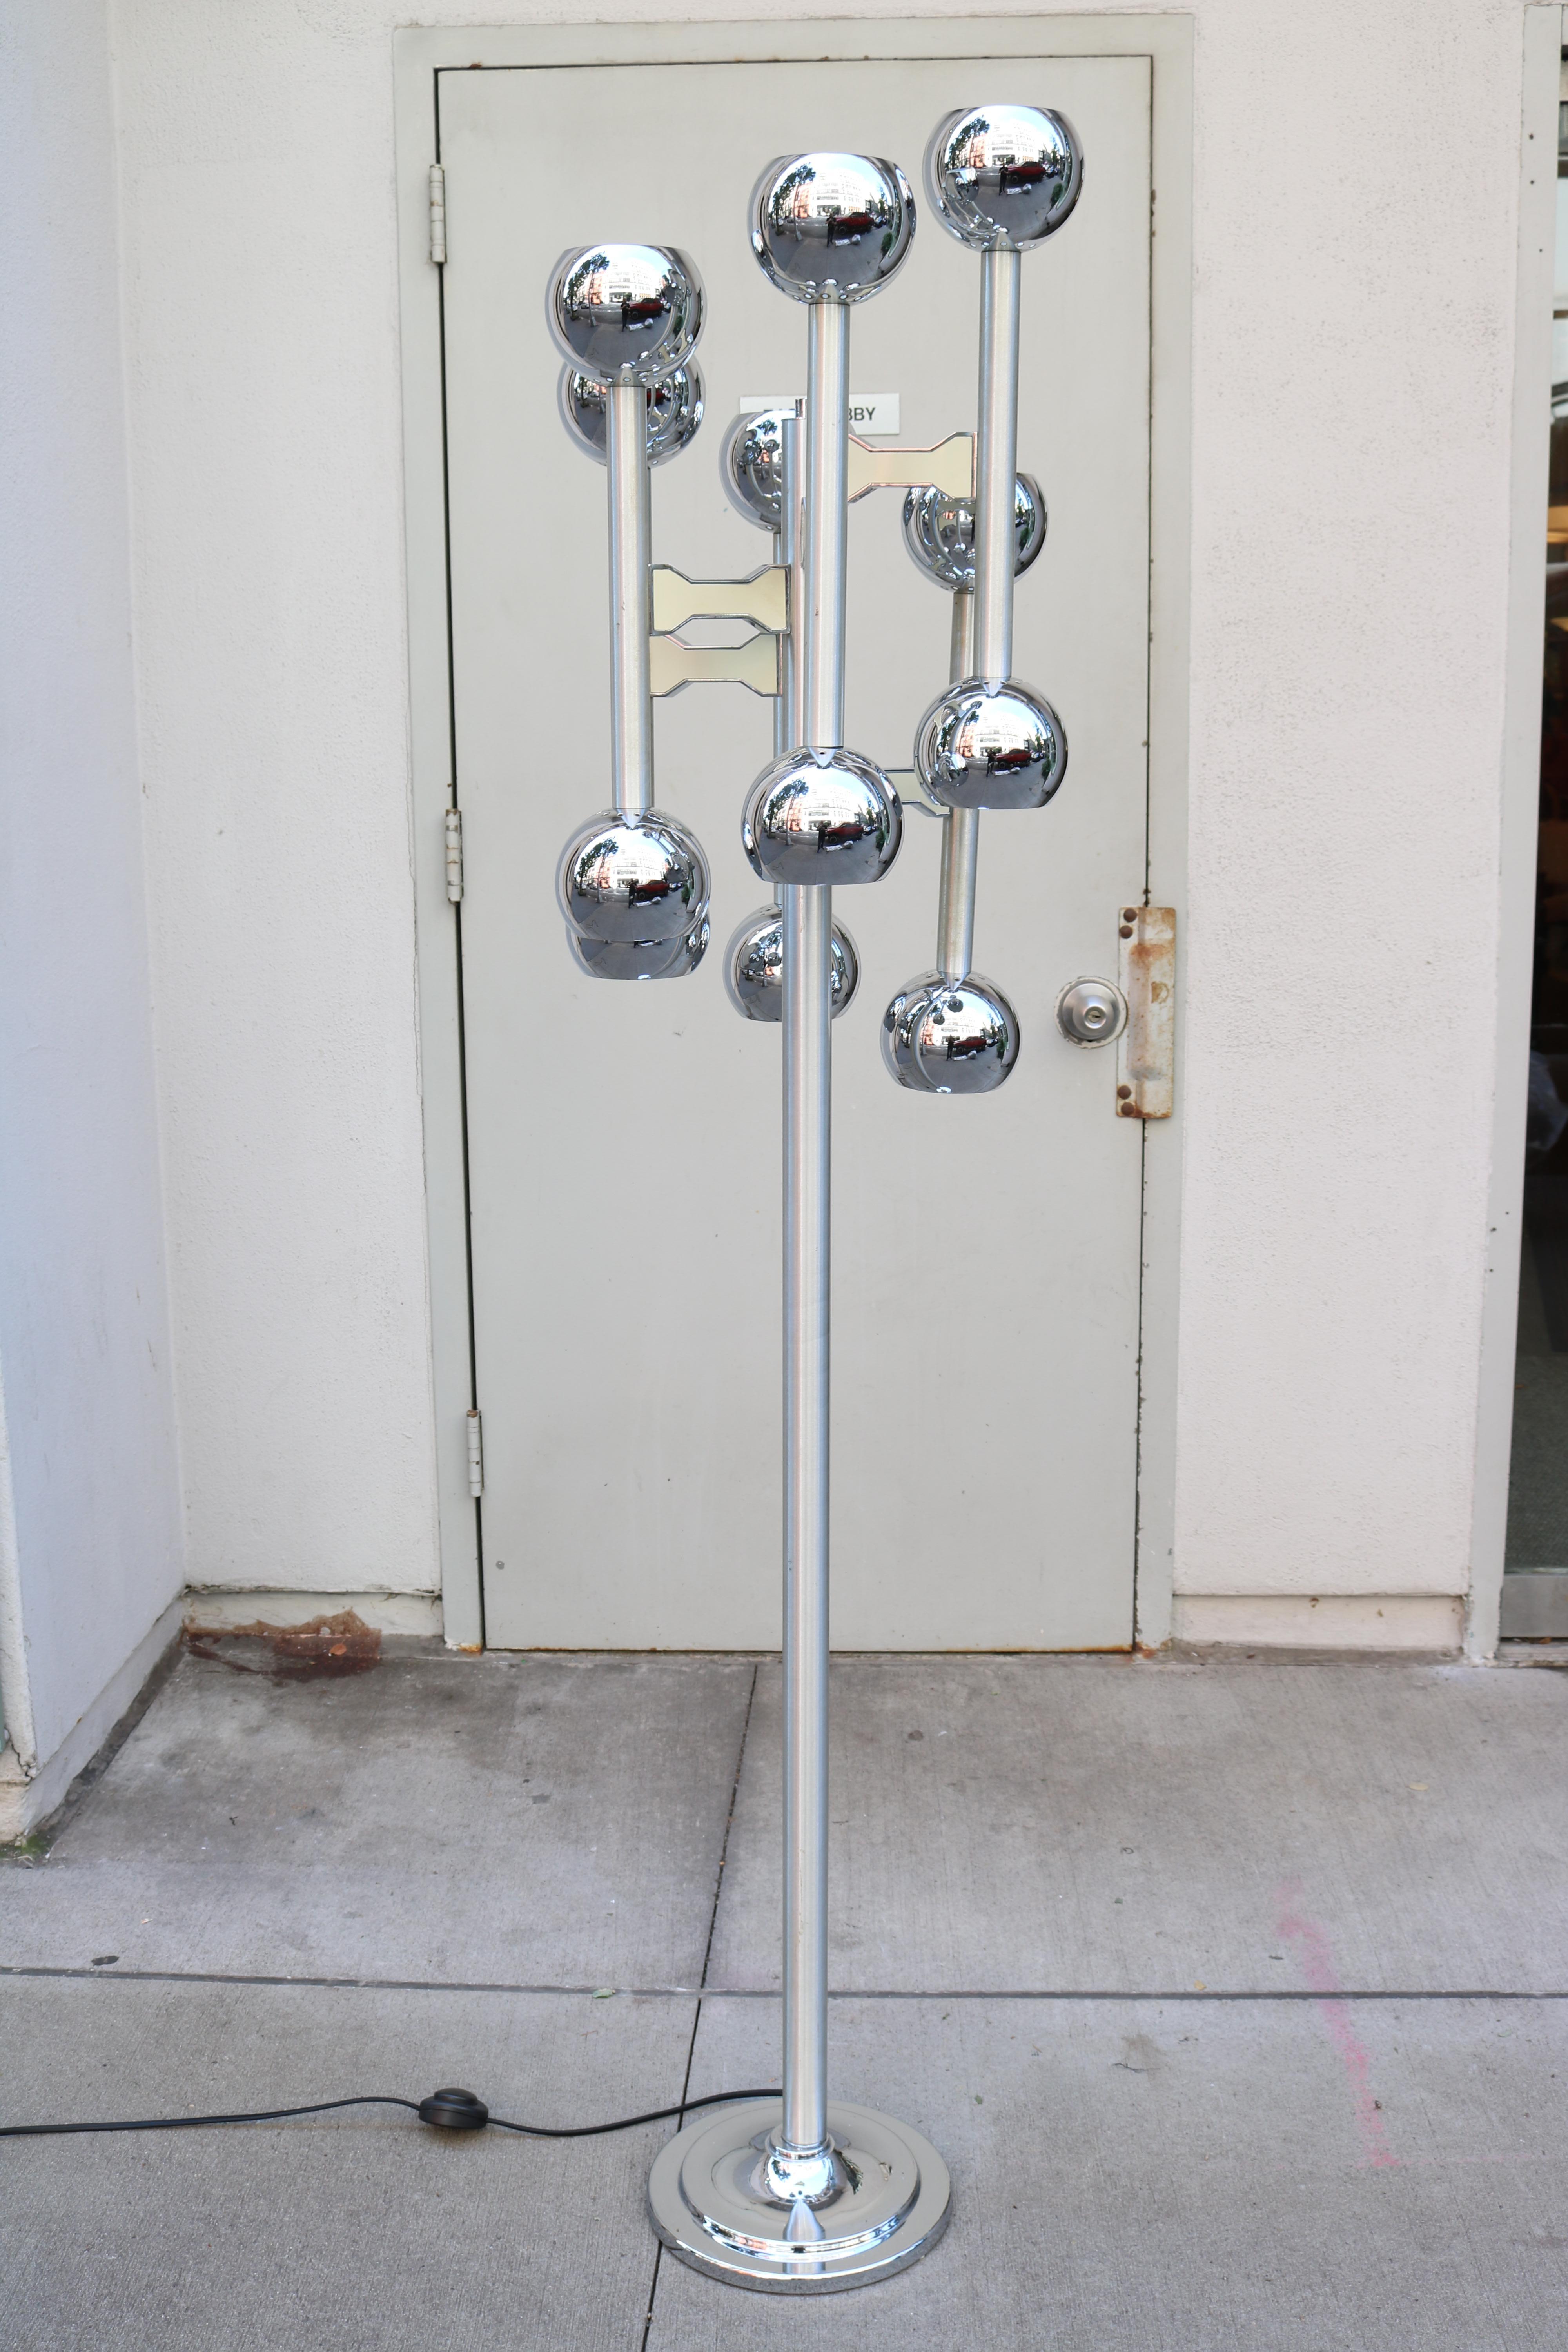 Modernist twelve light floor lamp. 
Chrome plated with six protruding arms with 
an up and down light on each arm. Mounted 
on a round base.